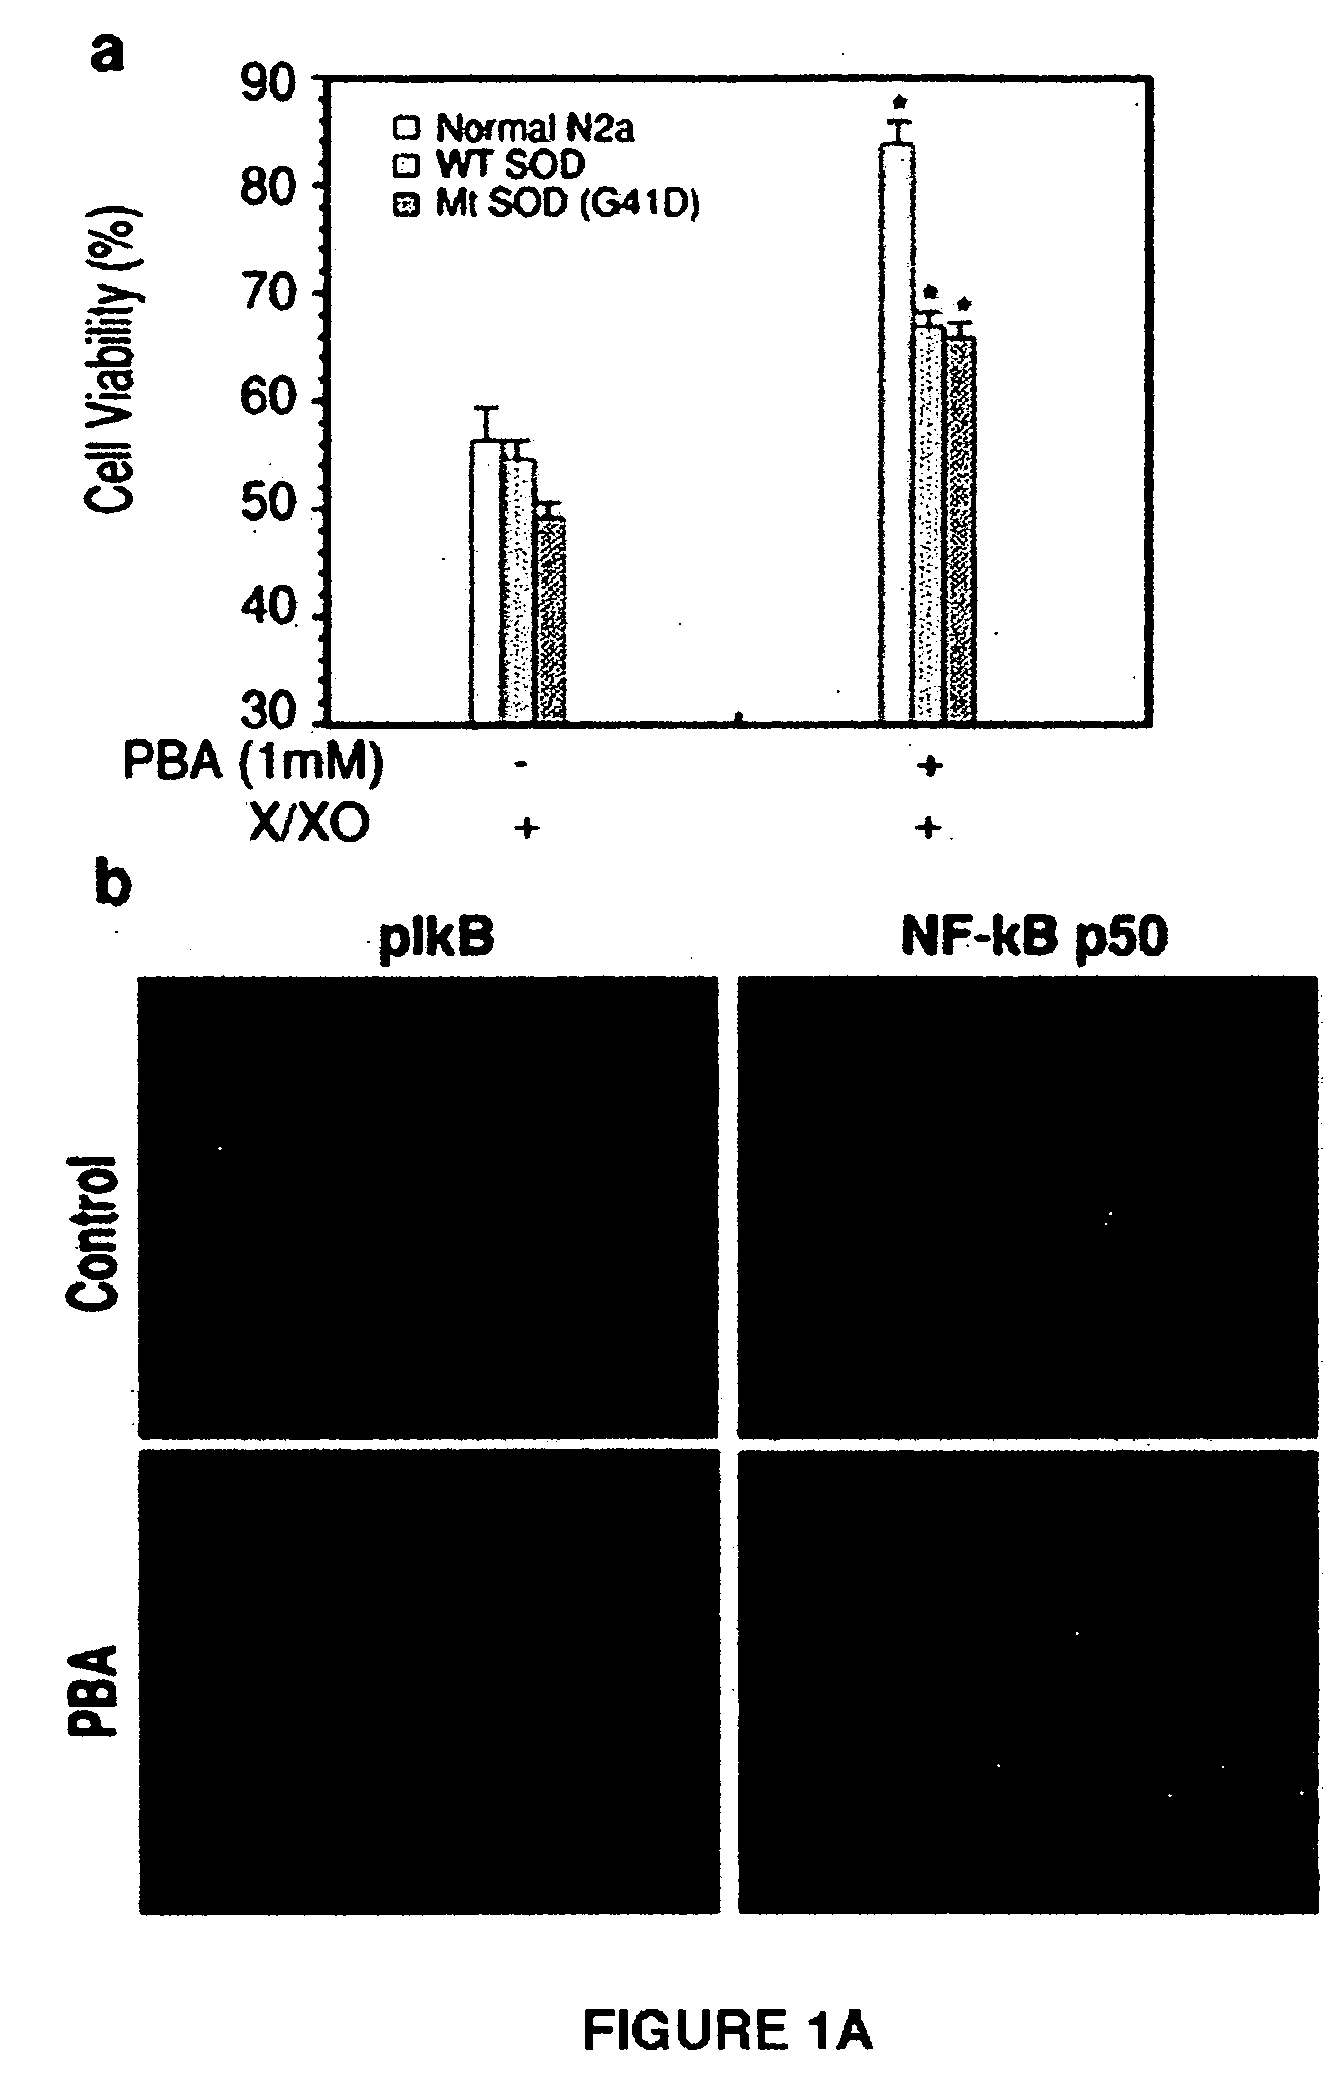 Method of ameliorating or abrogating the effects of a neurodegenerative disorder, such as amyotrophic lateral sclerosis (ALS), by using a HDAC inhibiting agent